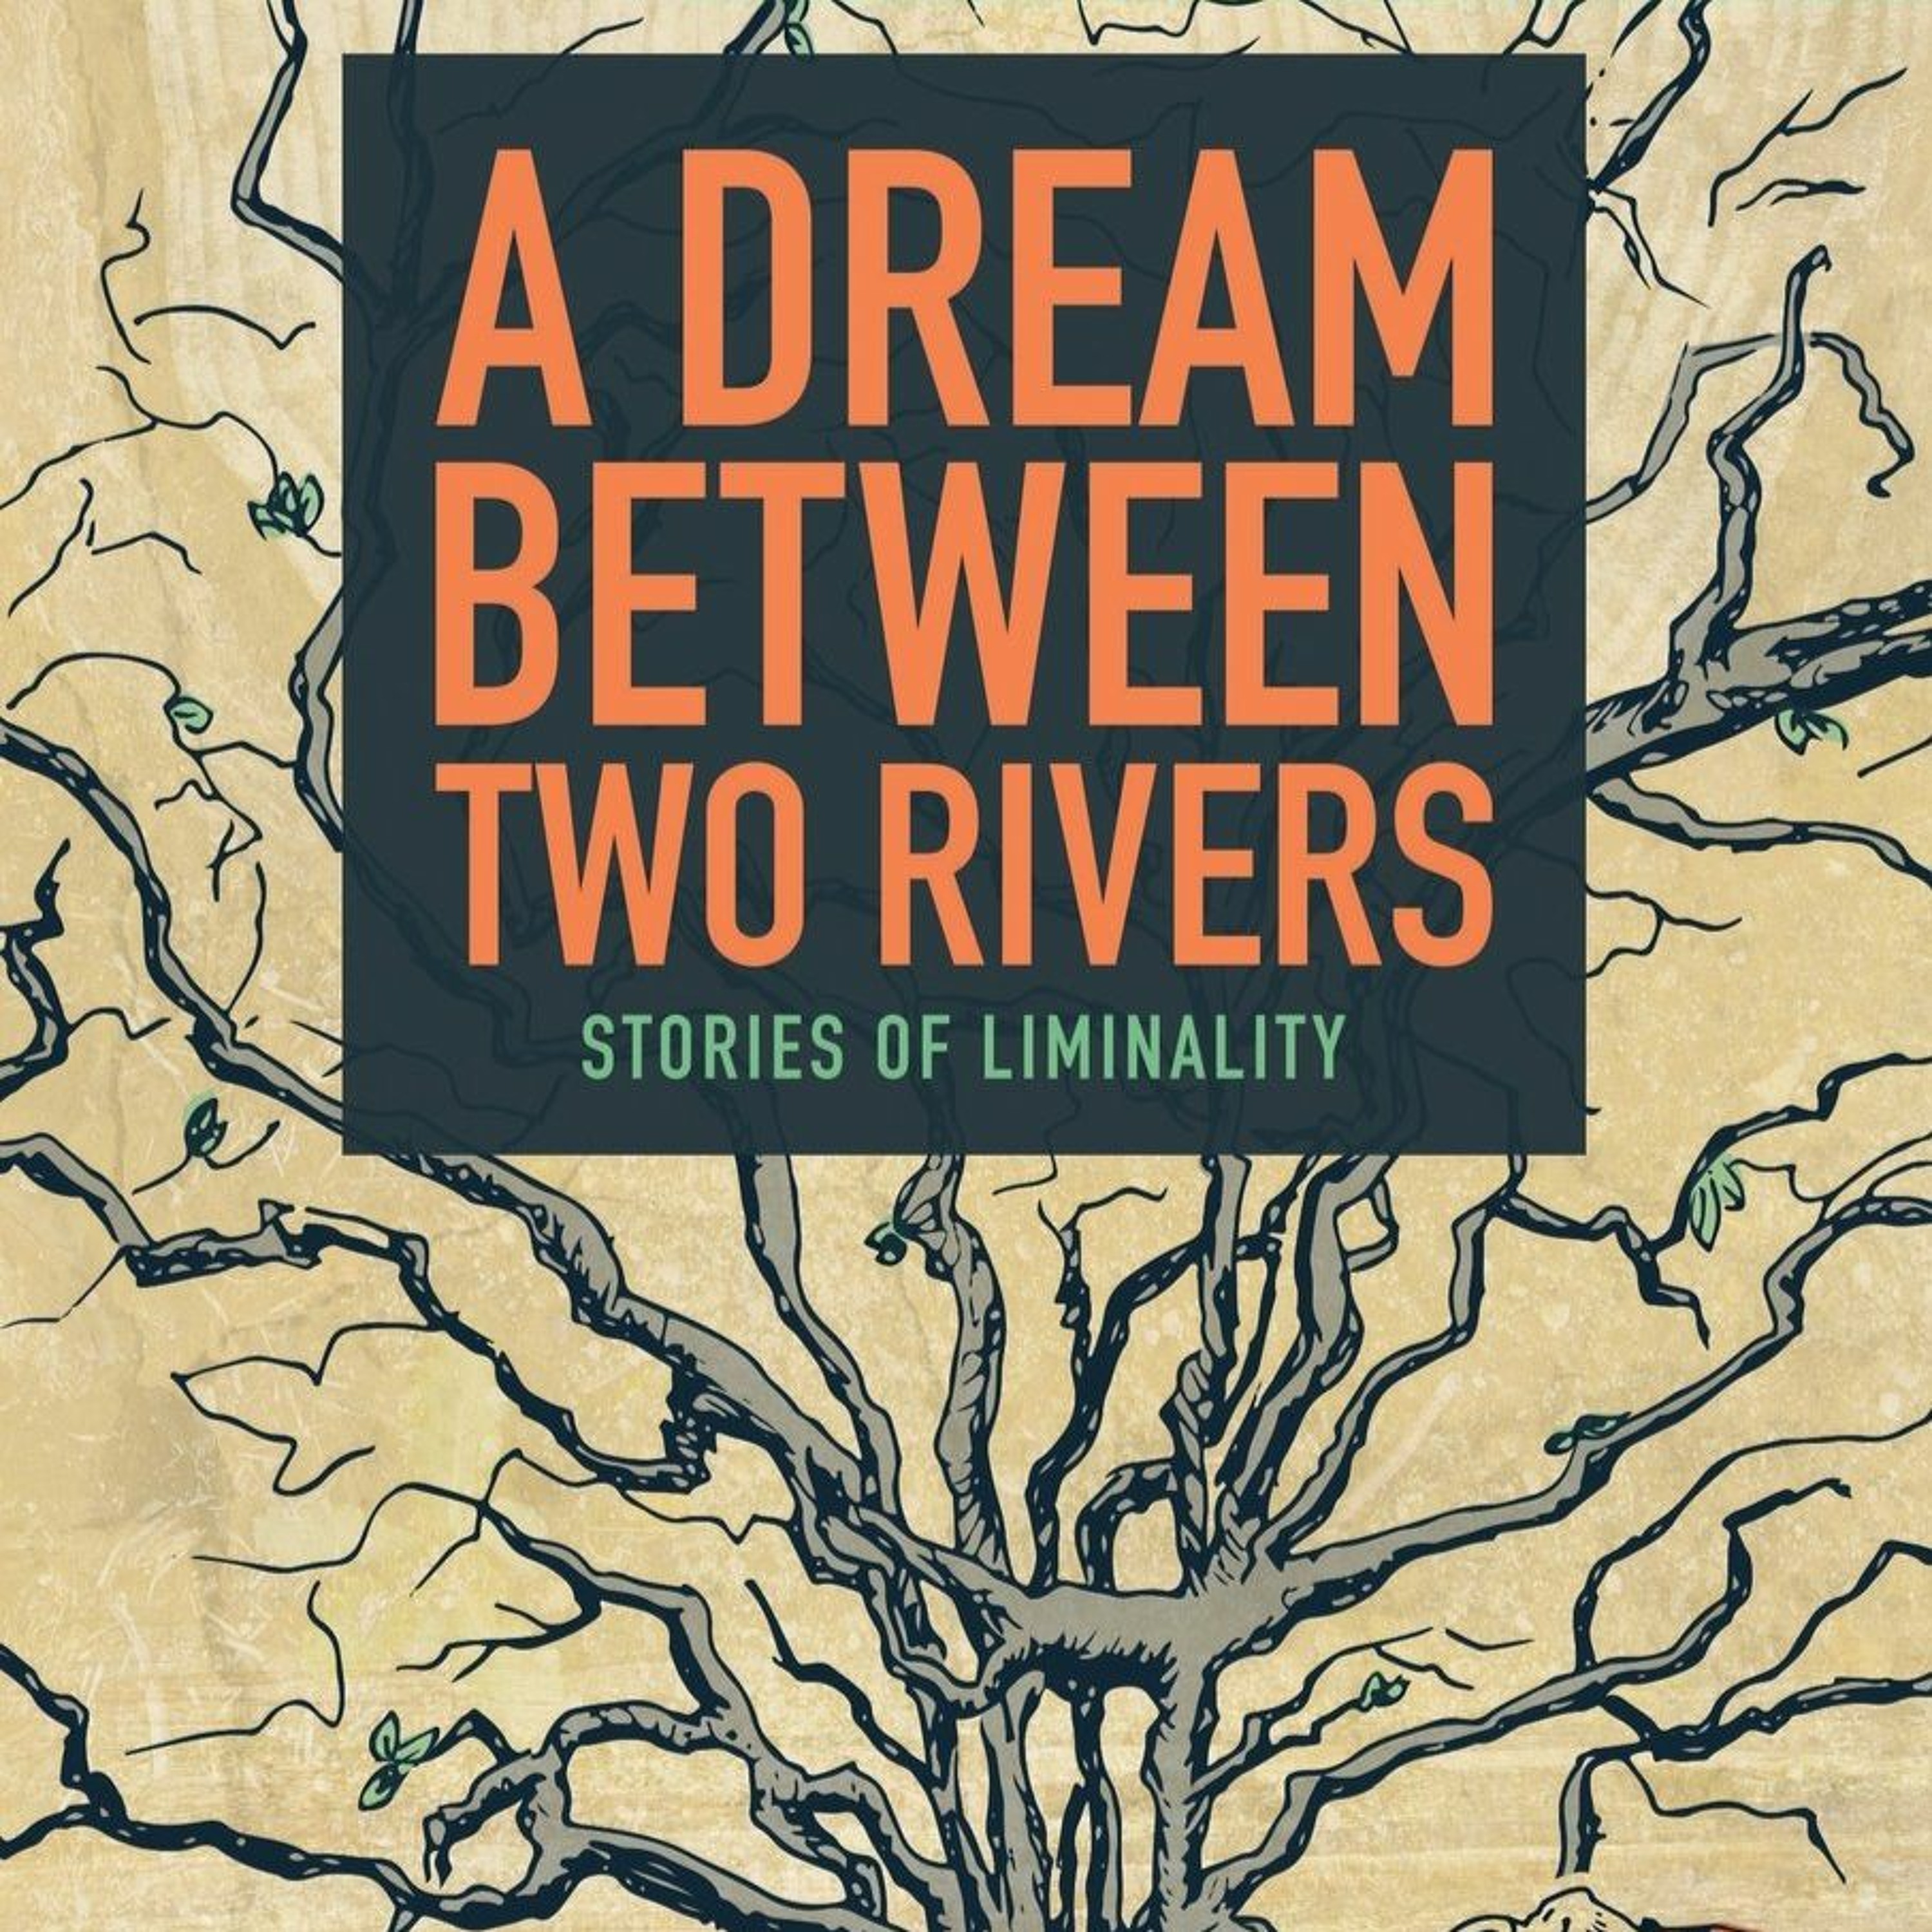 KL Pereira, “A Dream Between Two Rivers: Stories of Liminality”